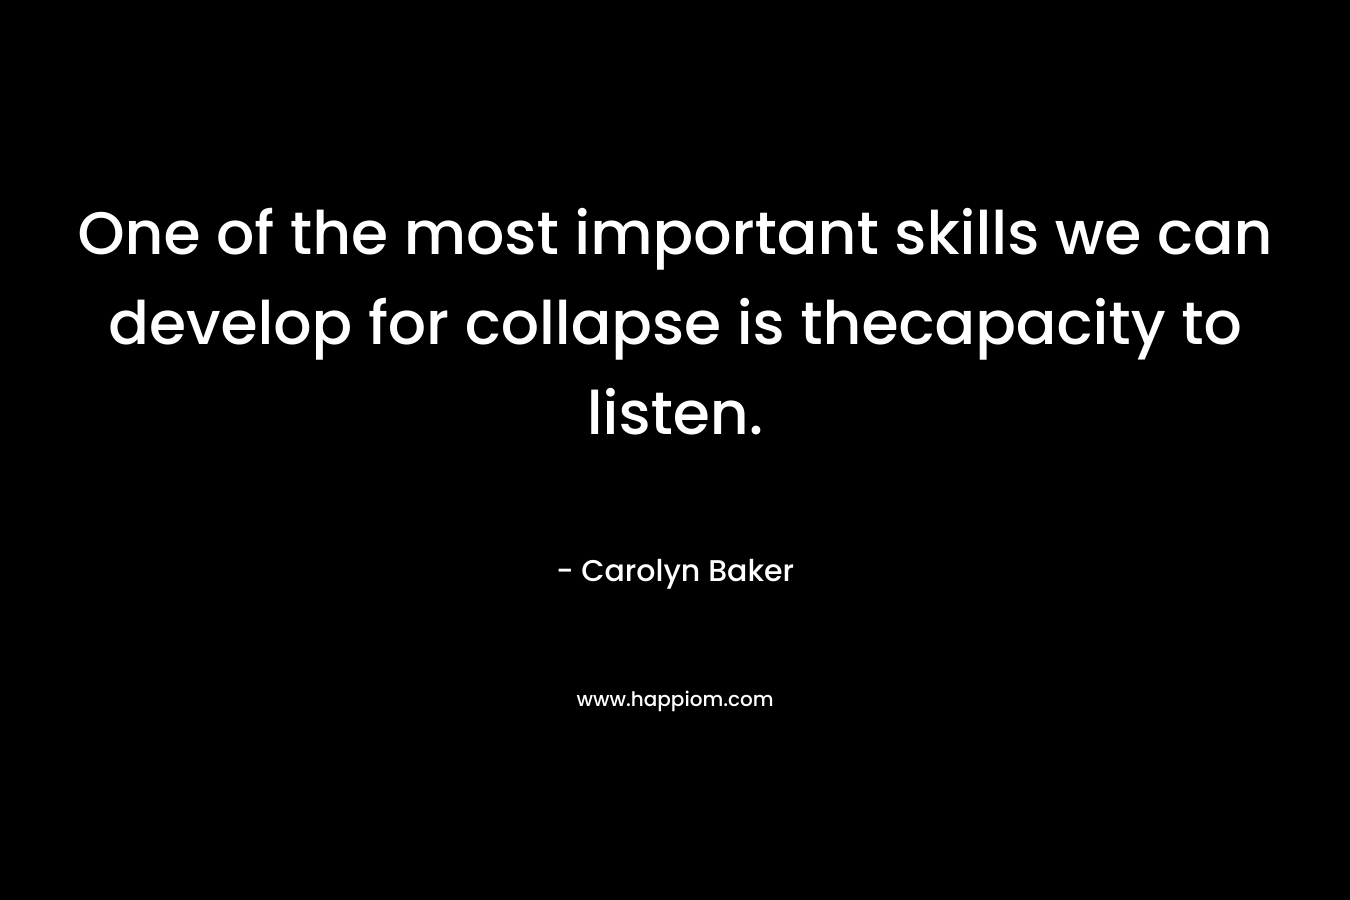 One of the most important skills we can develop for collapse is thecapacity to listen. – Carolyn Baker